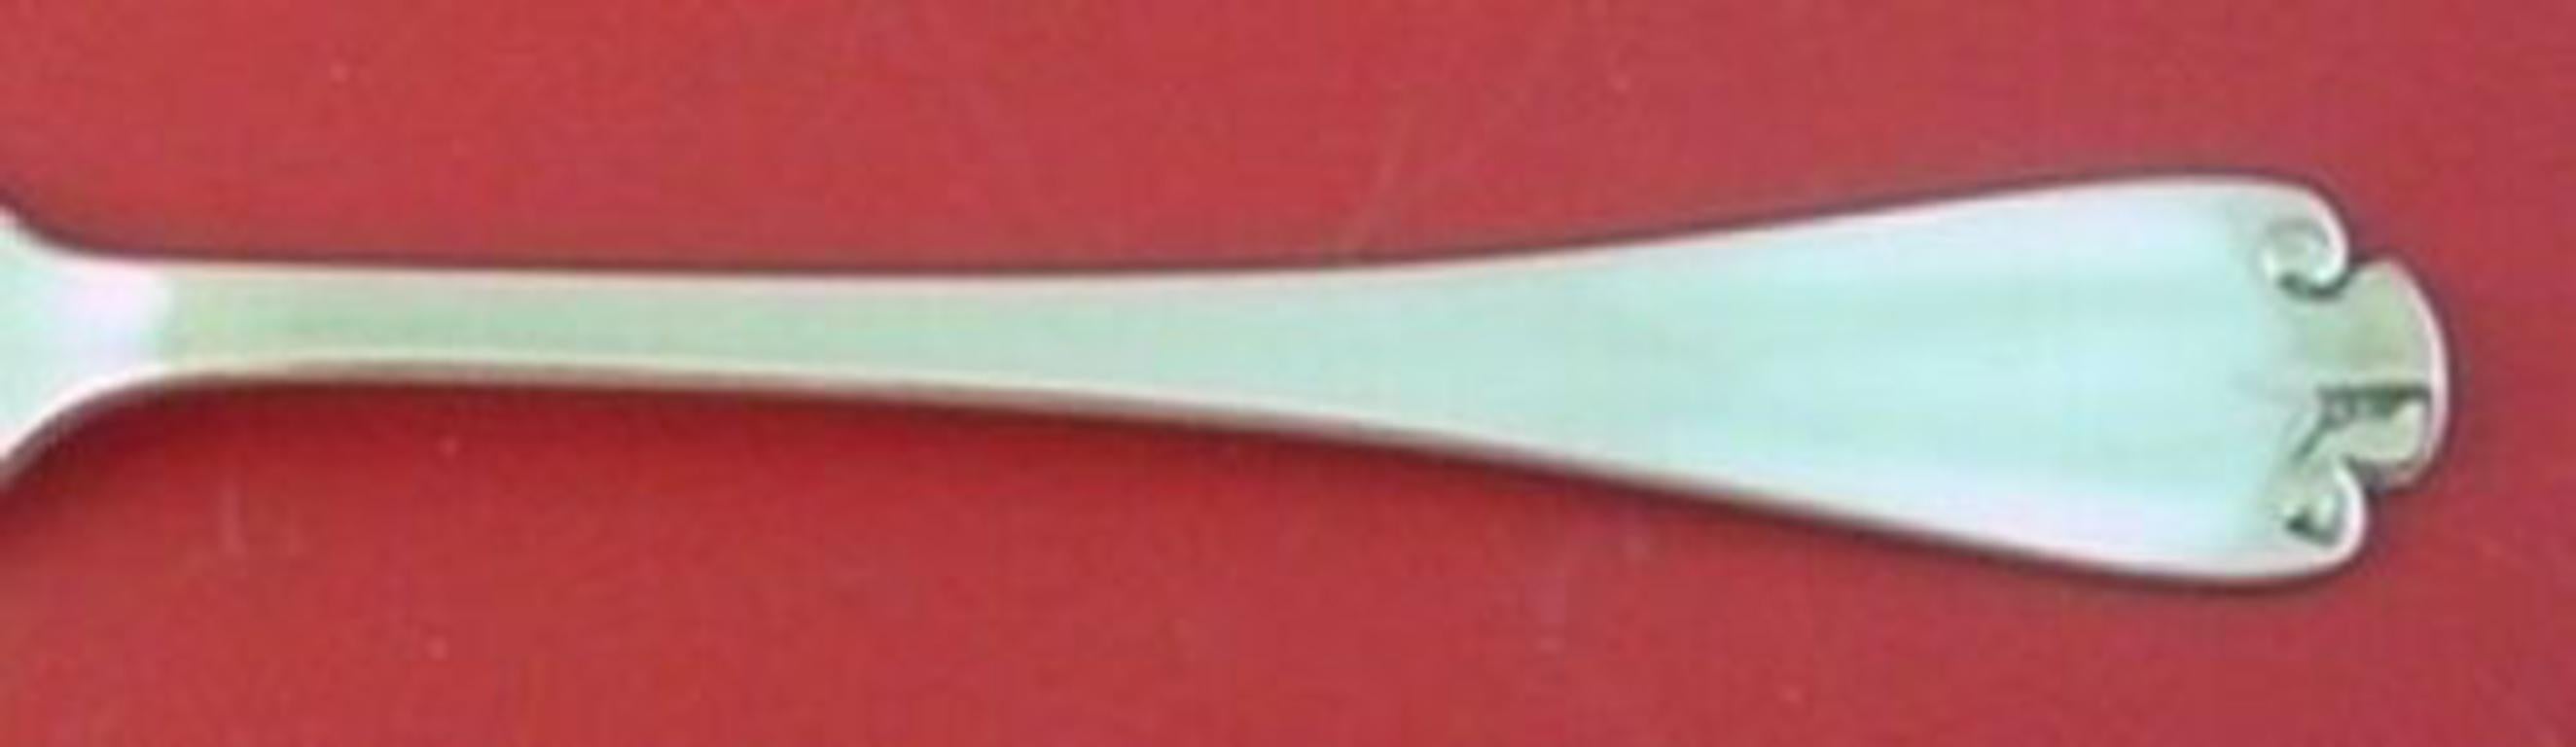 Sterling silver berry spoon, 9